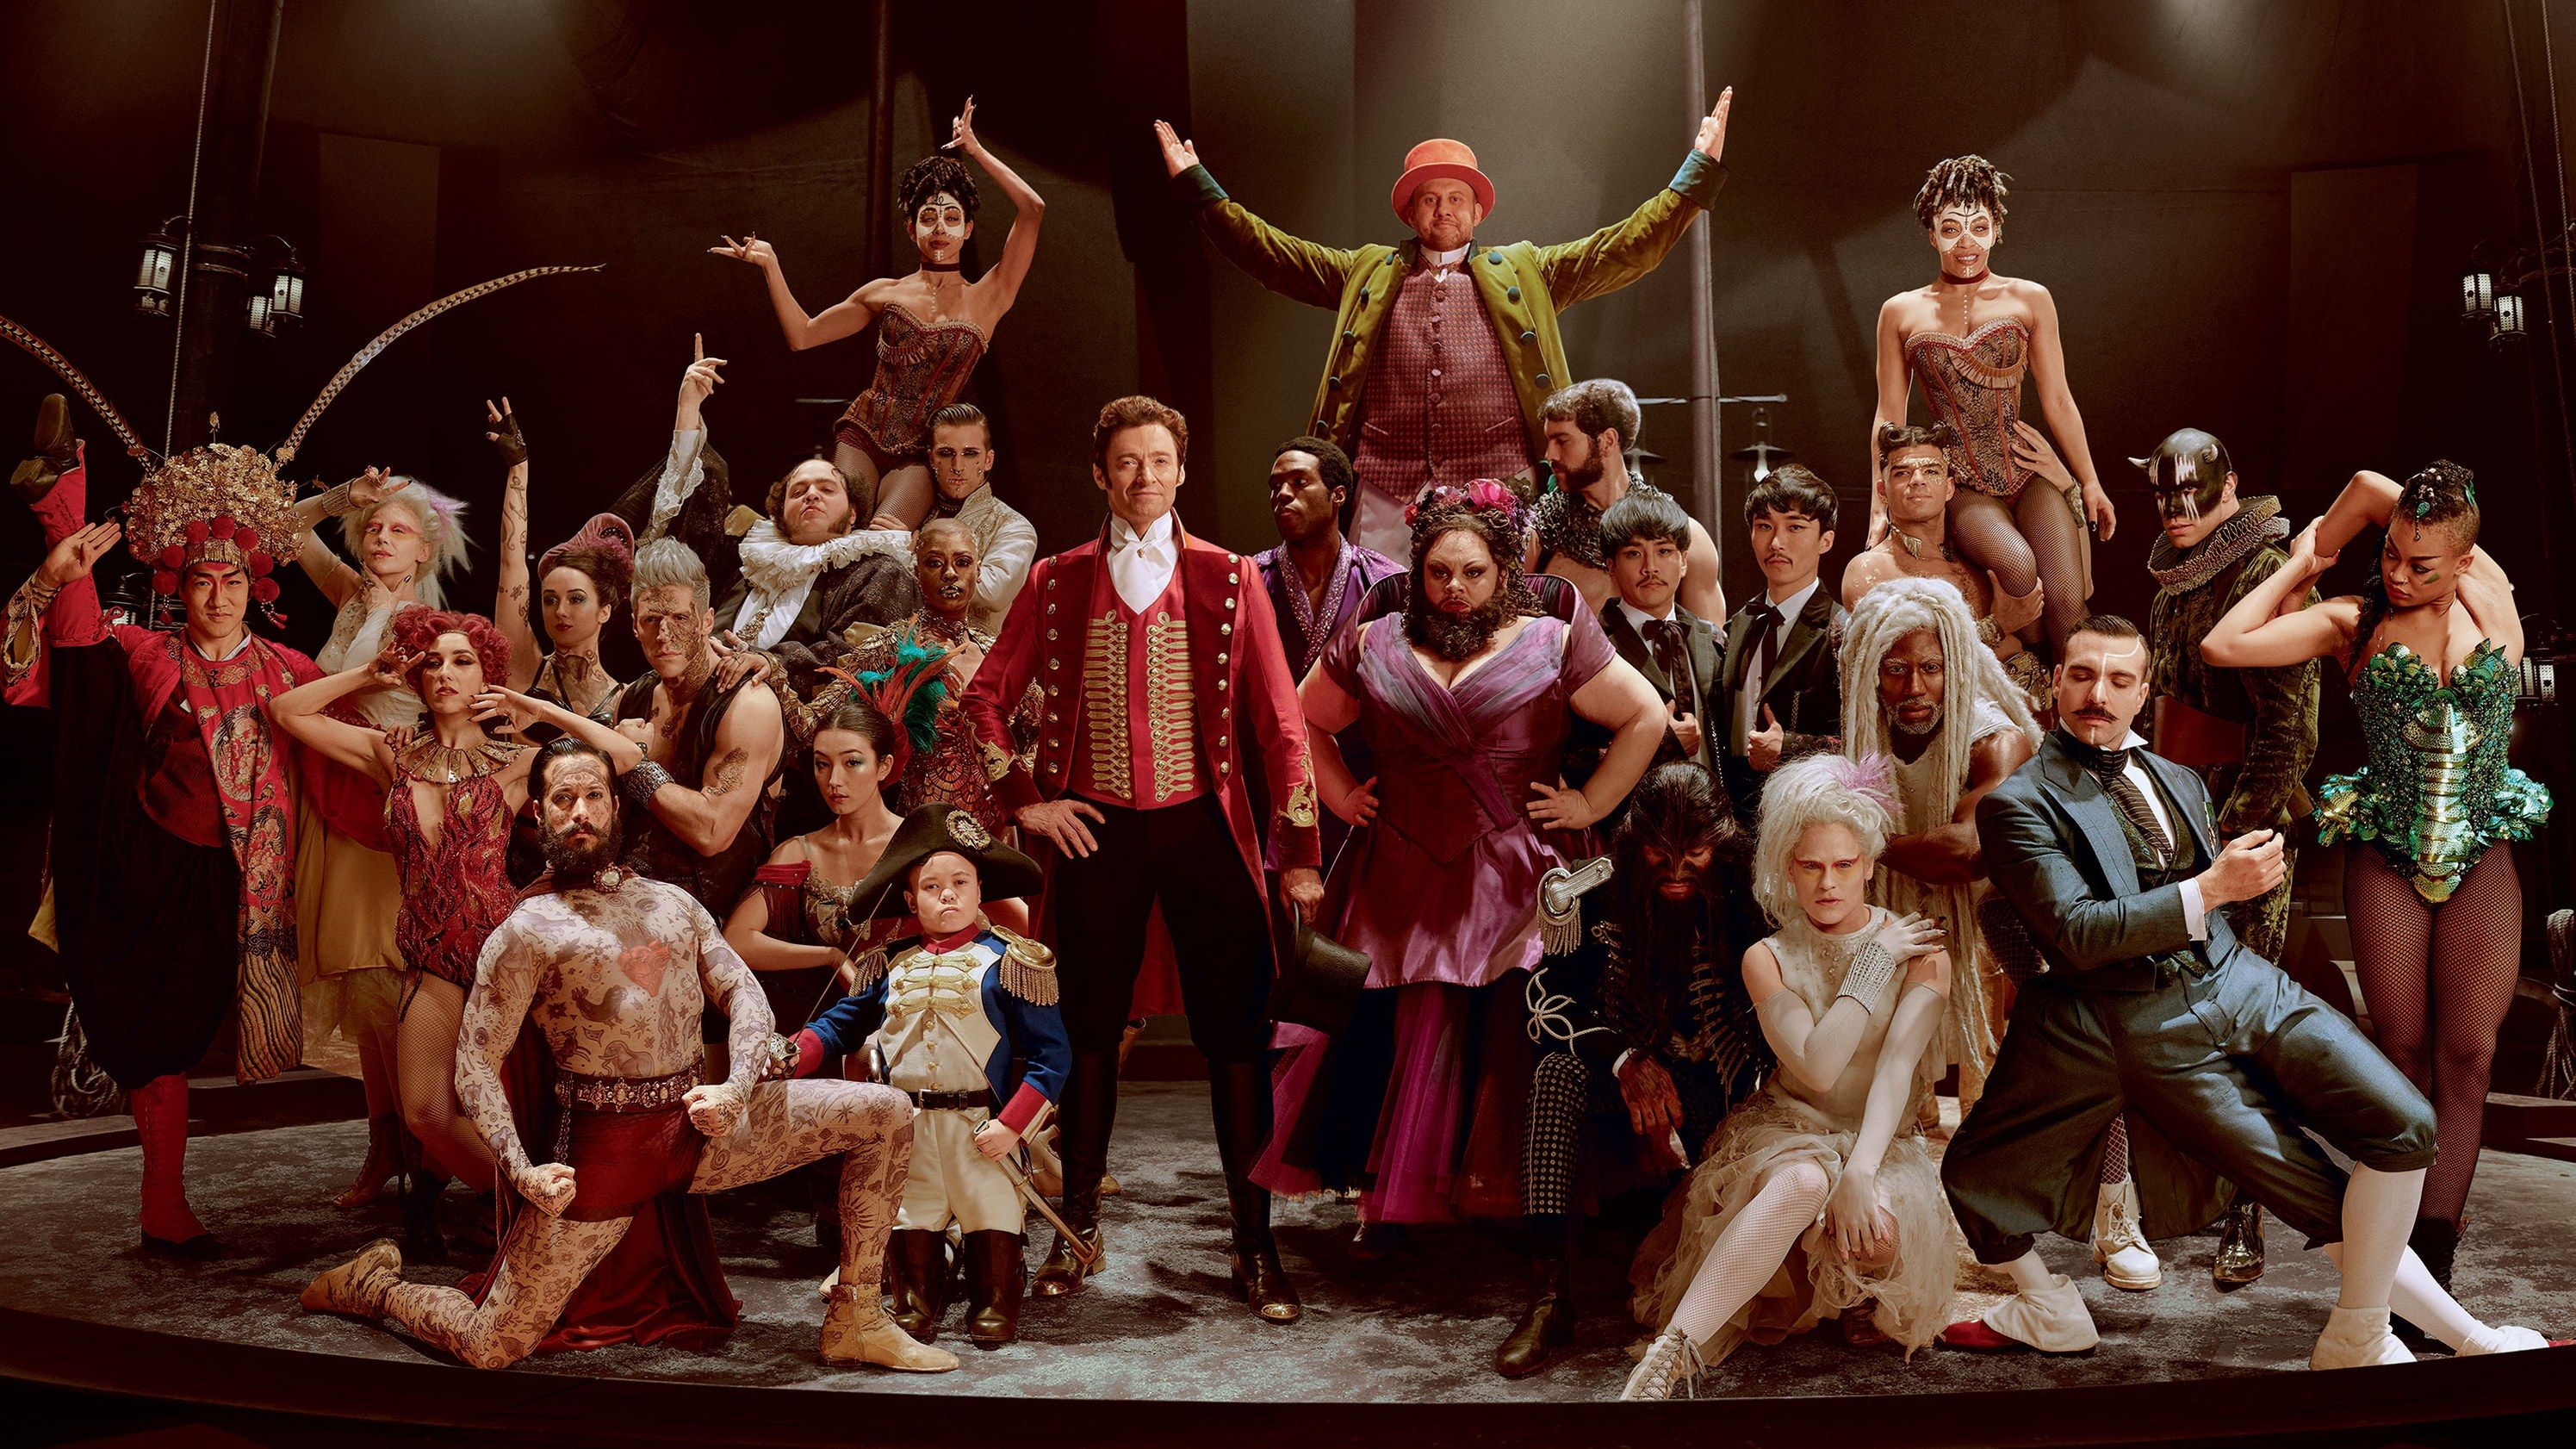 The Greatest Showman review: Flashy, splashy, and fake